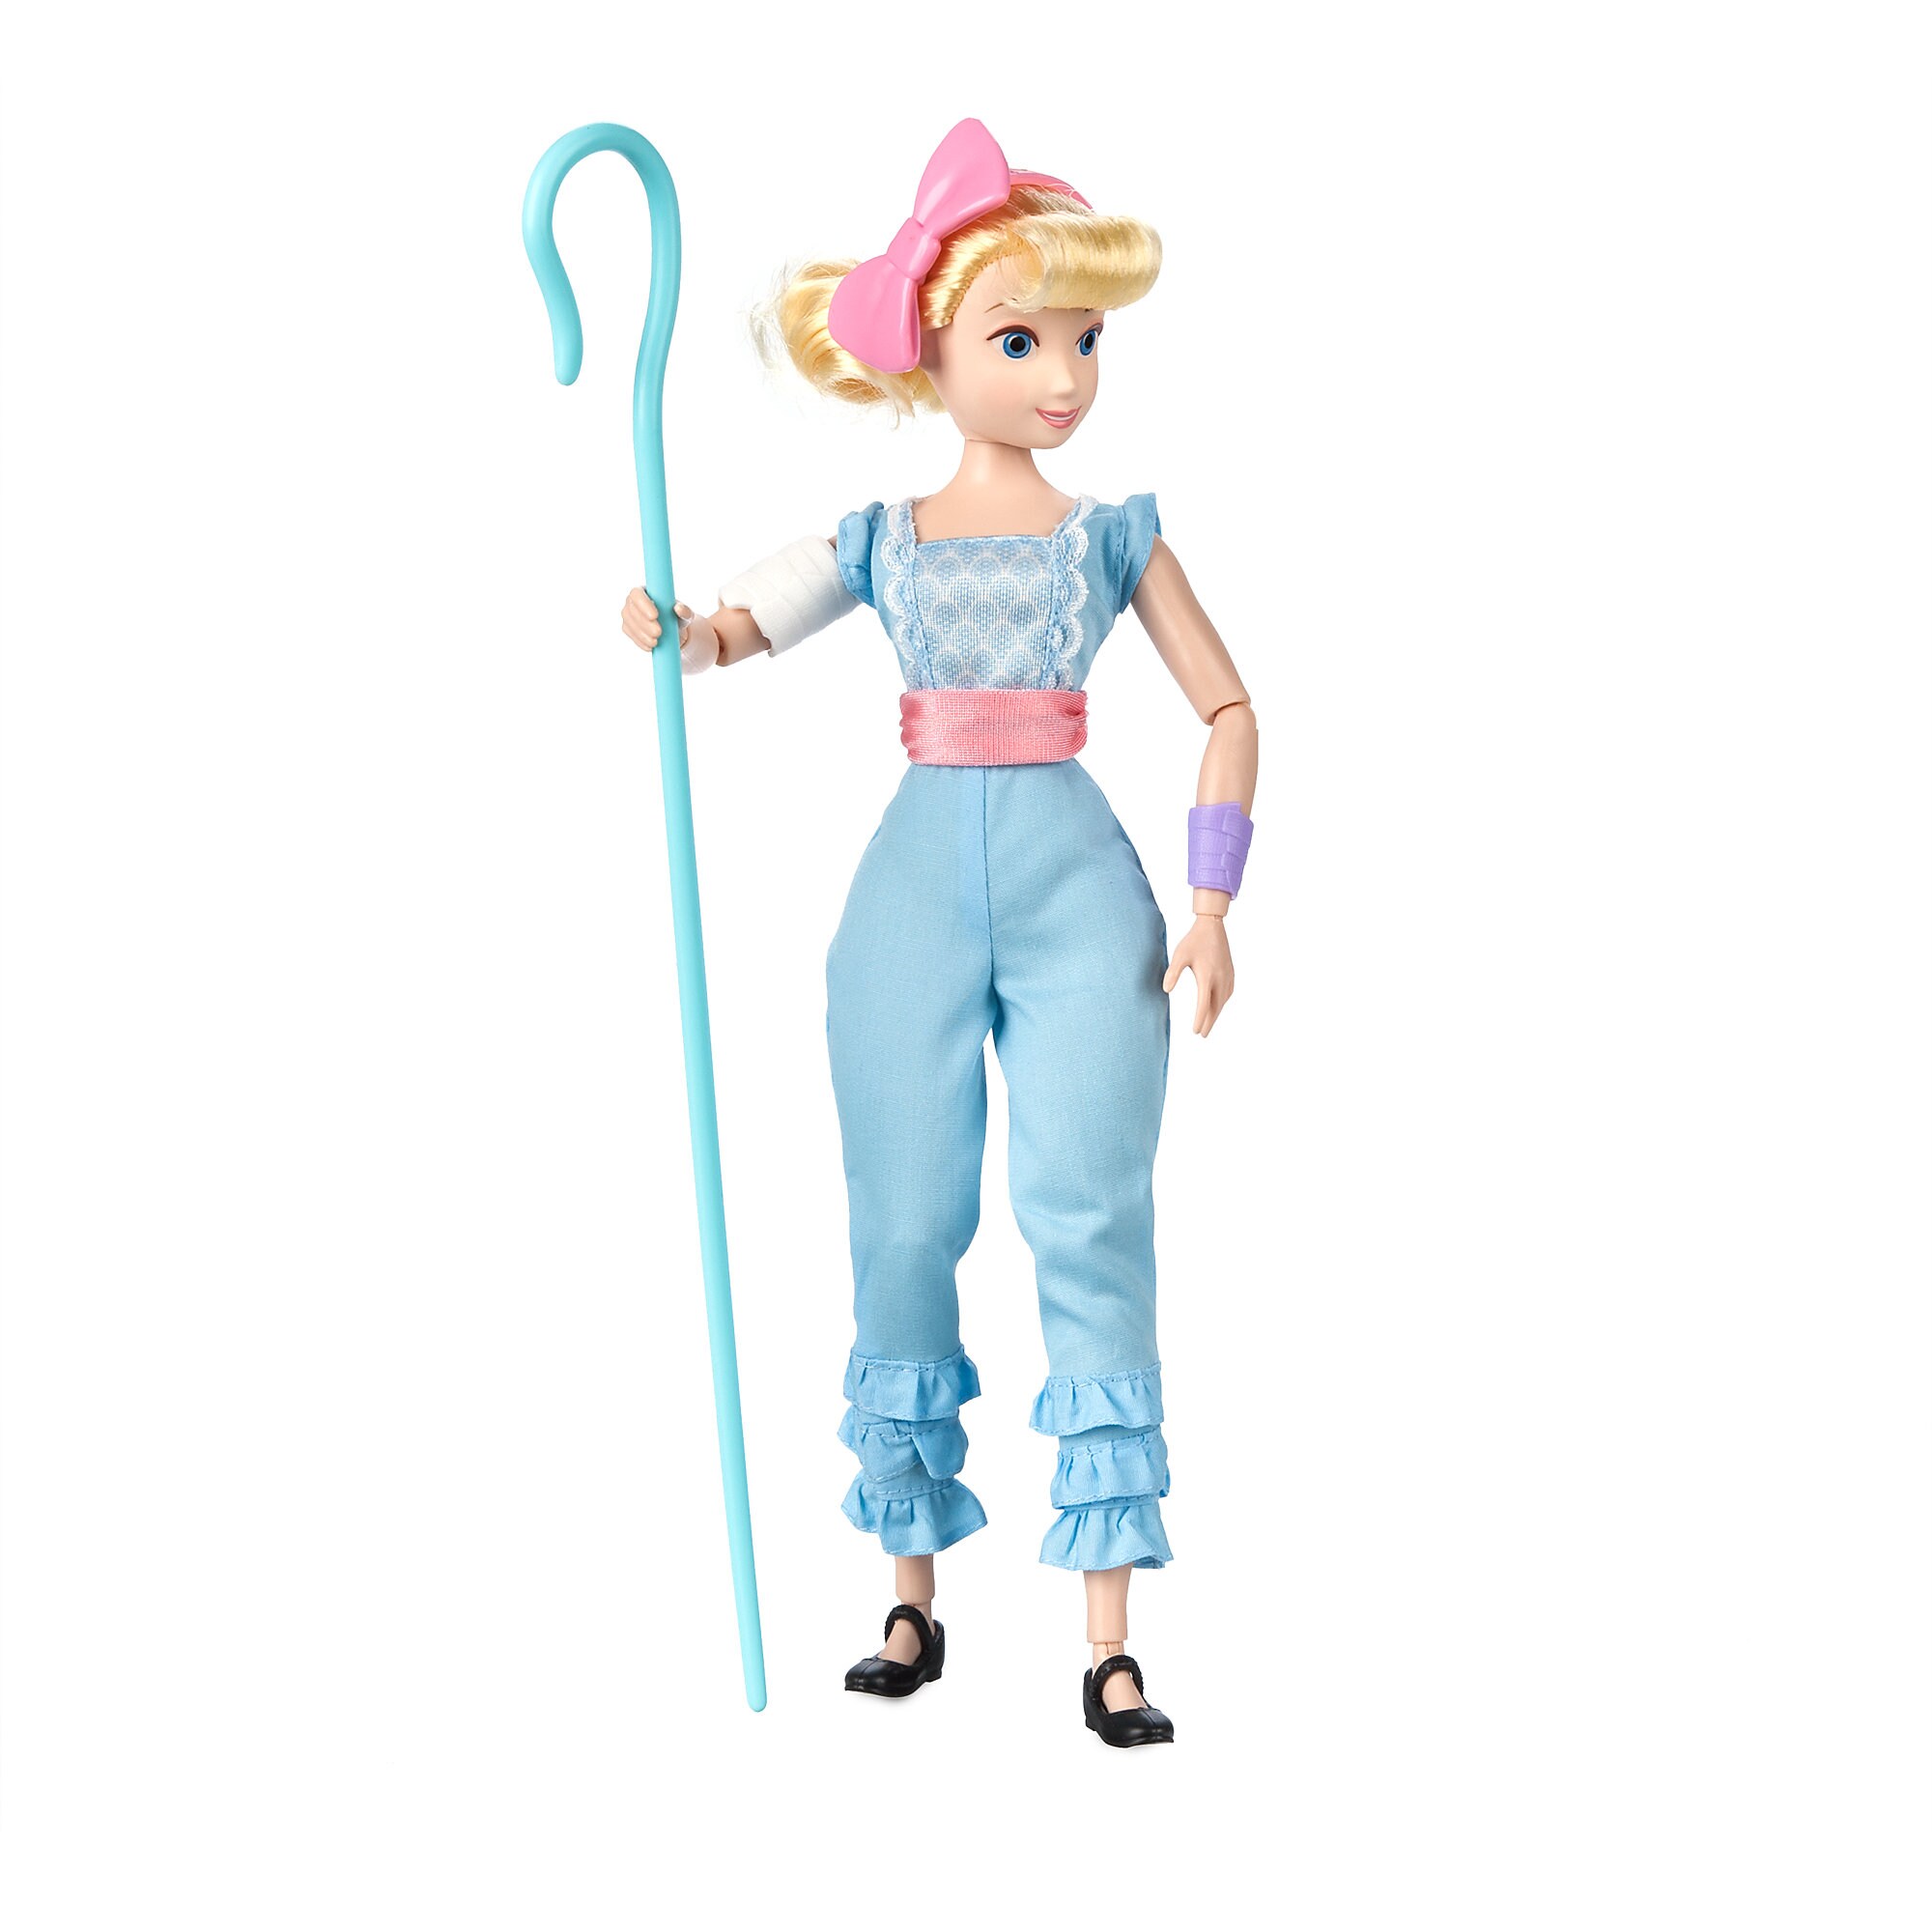 Bo Peep Epic Moves Action Doll Play Set - Toy Story 4